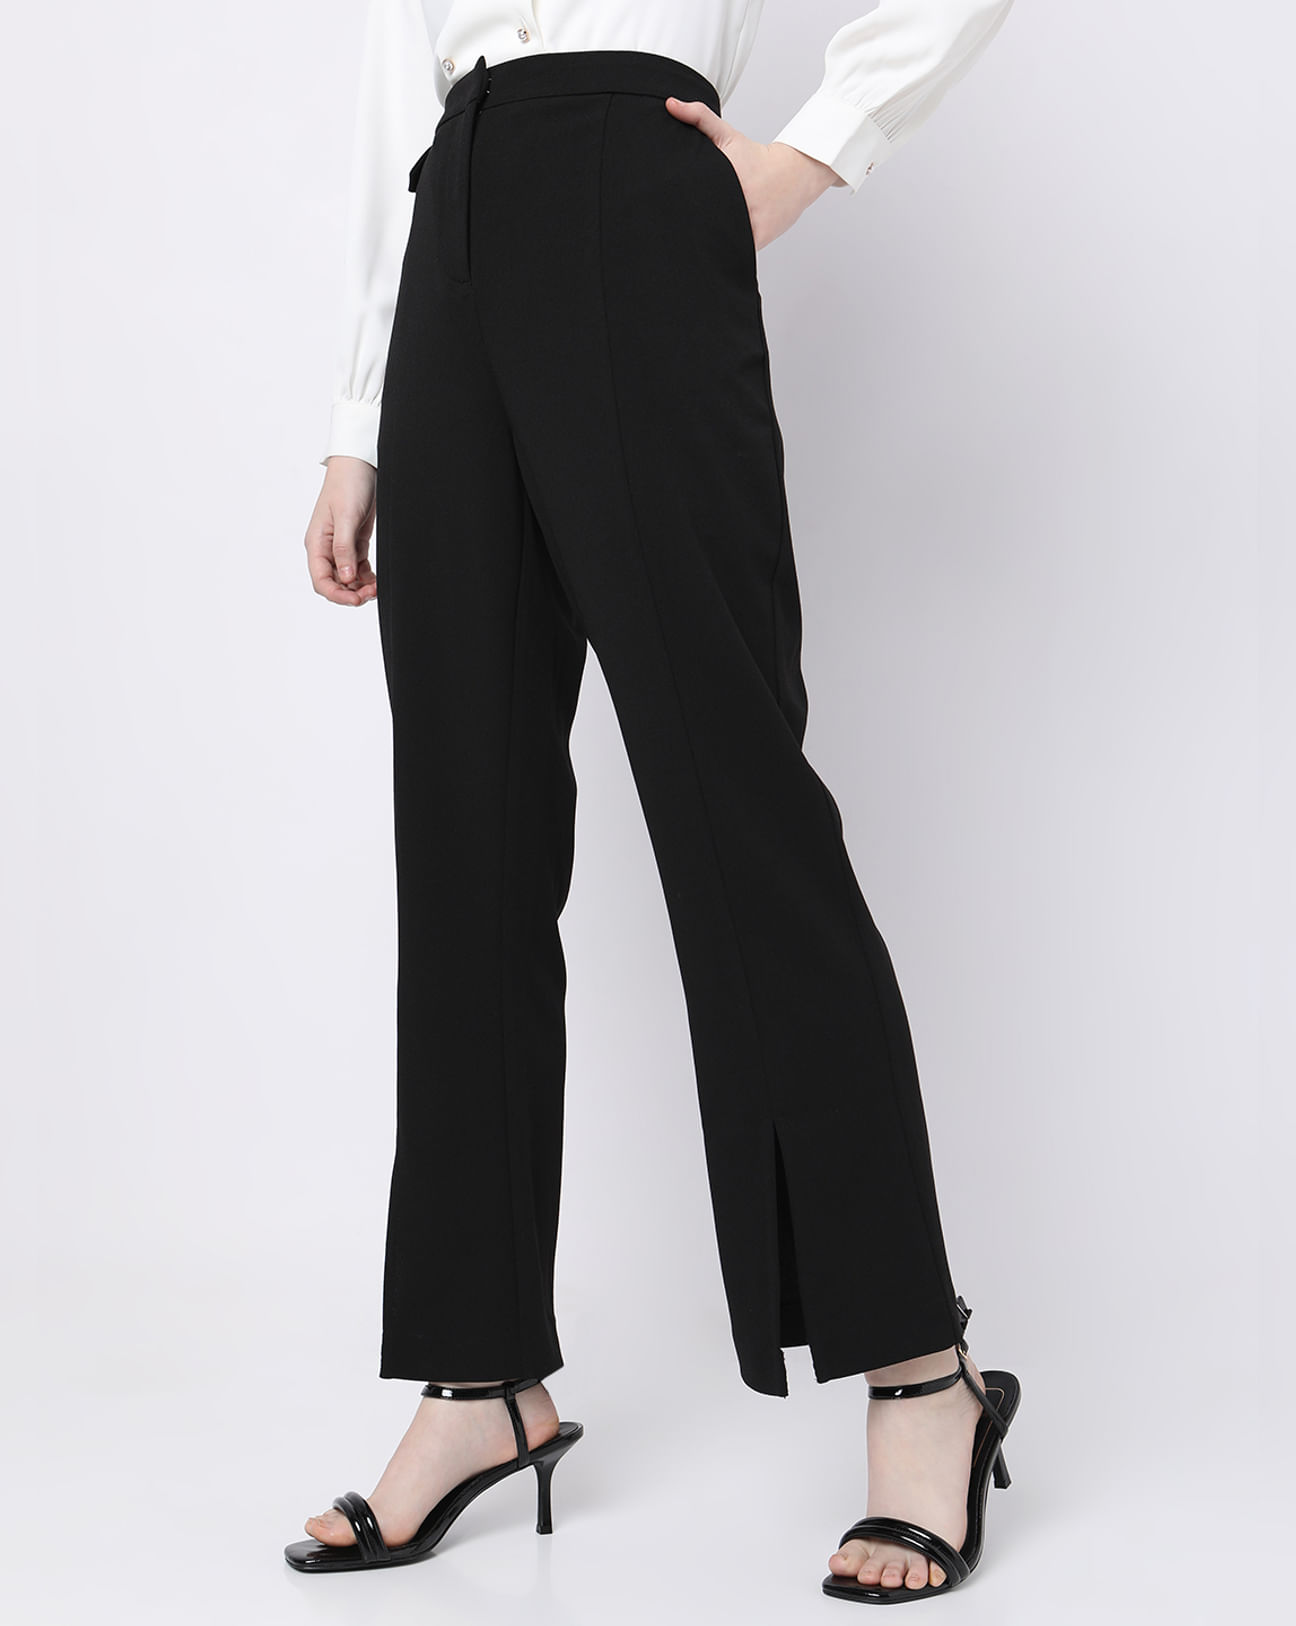 Head to the Office Black High-Waisted Side Slit Trouser Pants